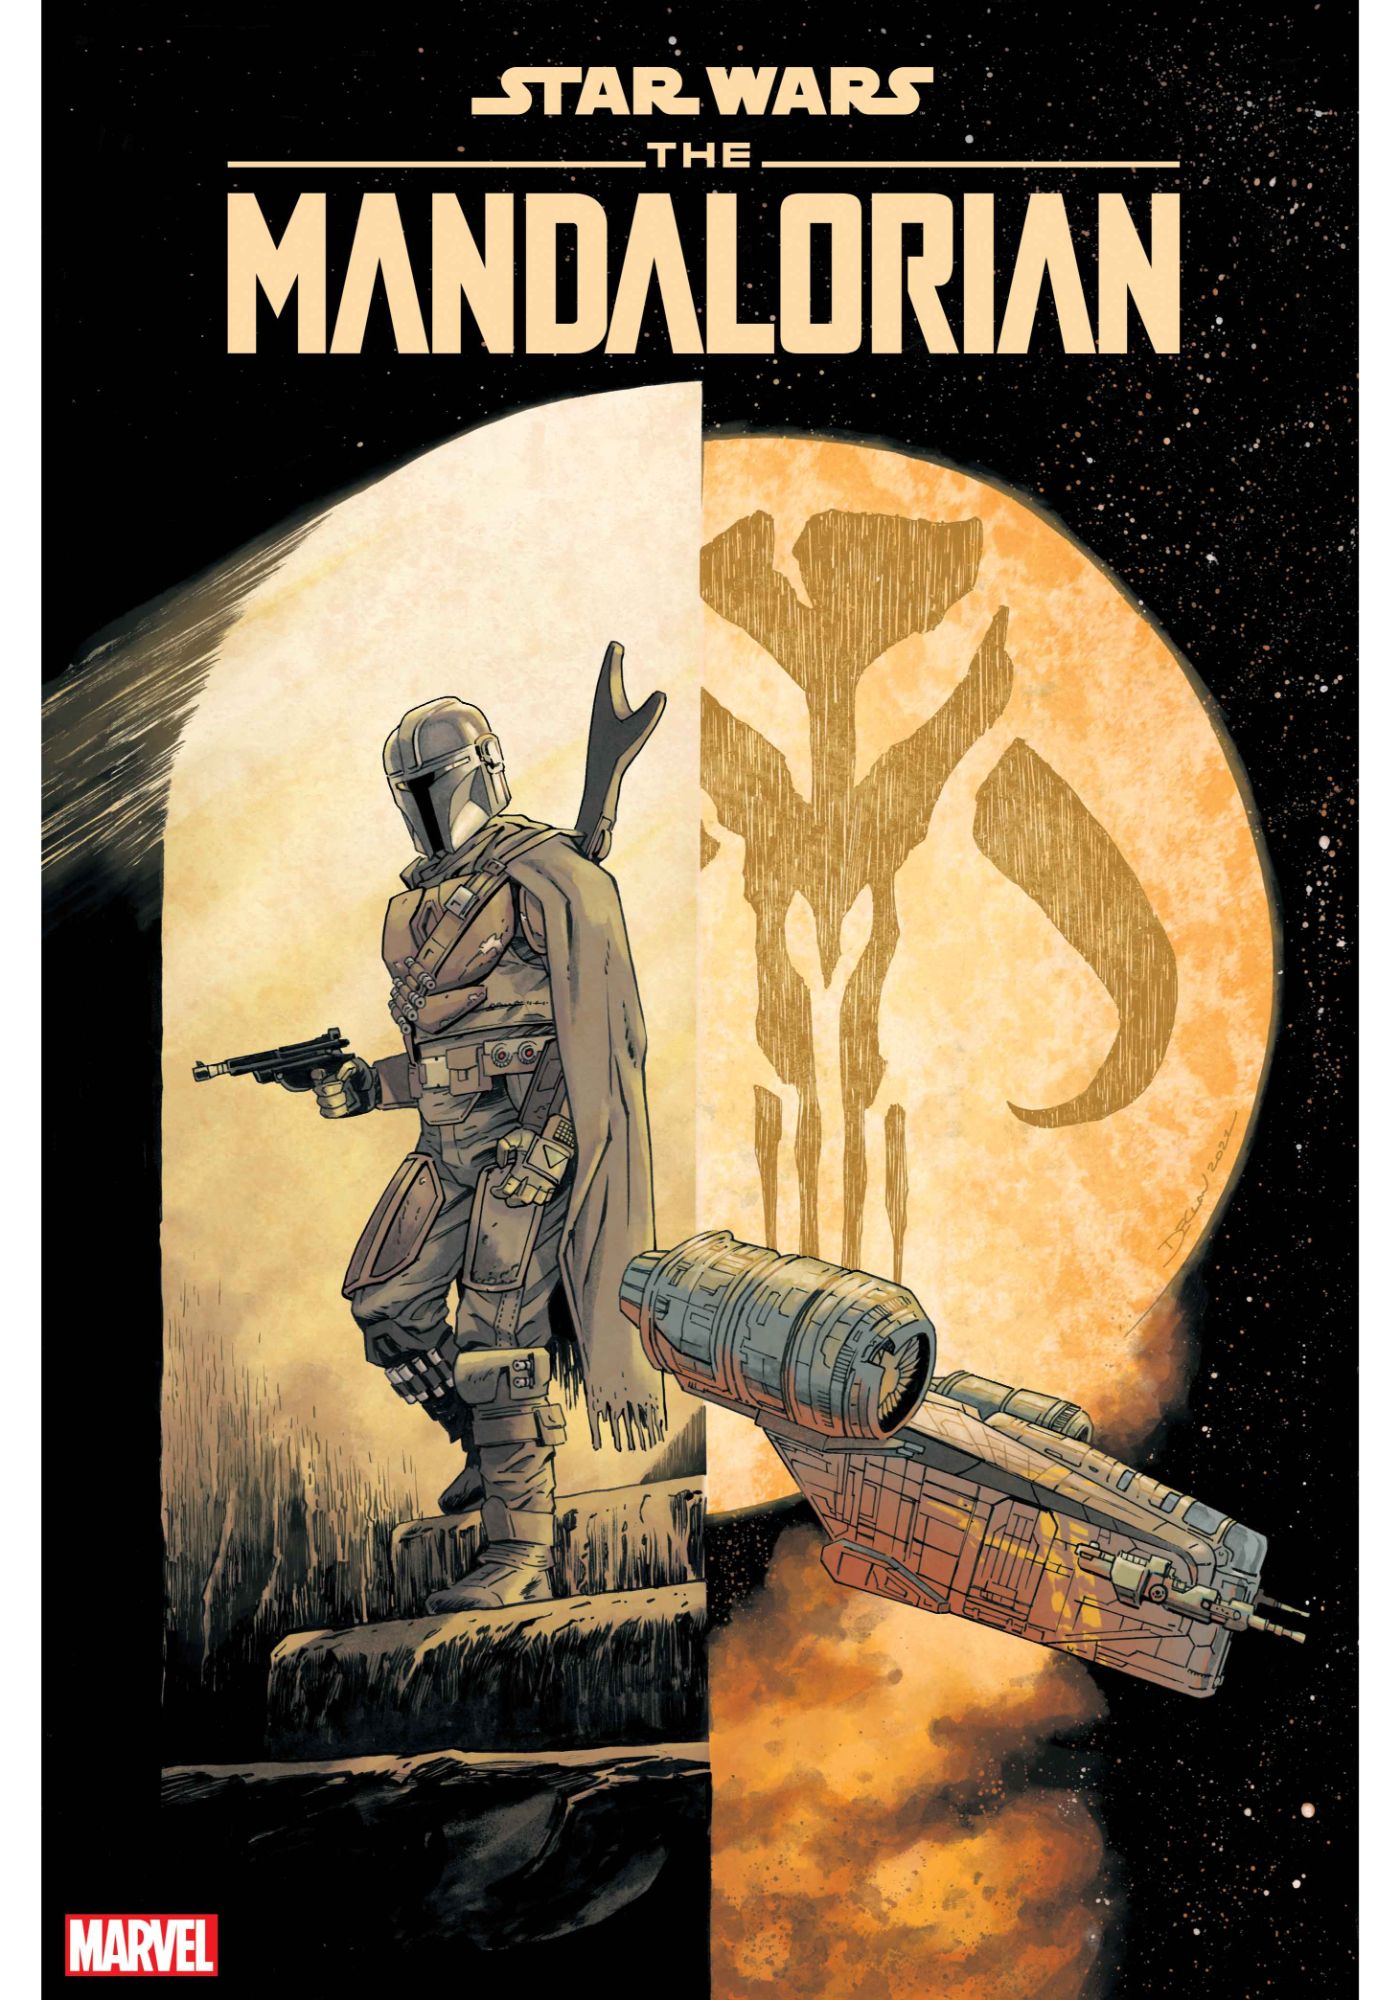 Star Wars Mandalorian # 1 Concept 1:10 Variant Cover NM Marvel Ships July 6th